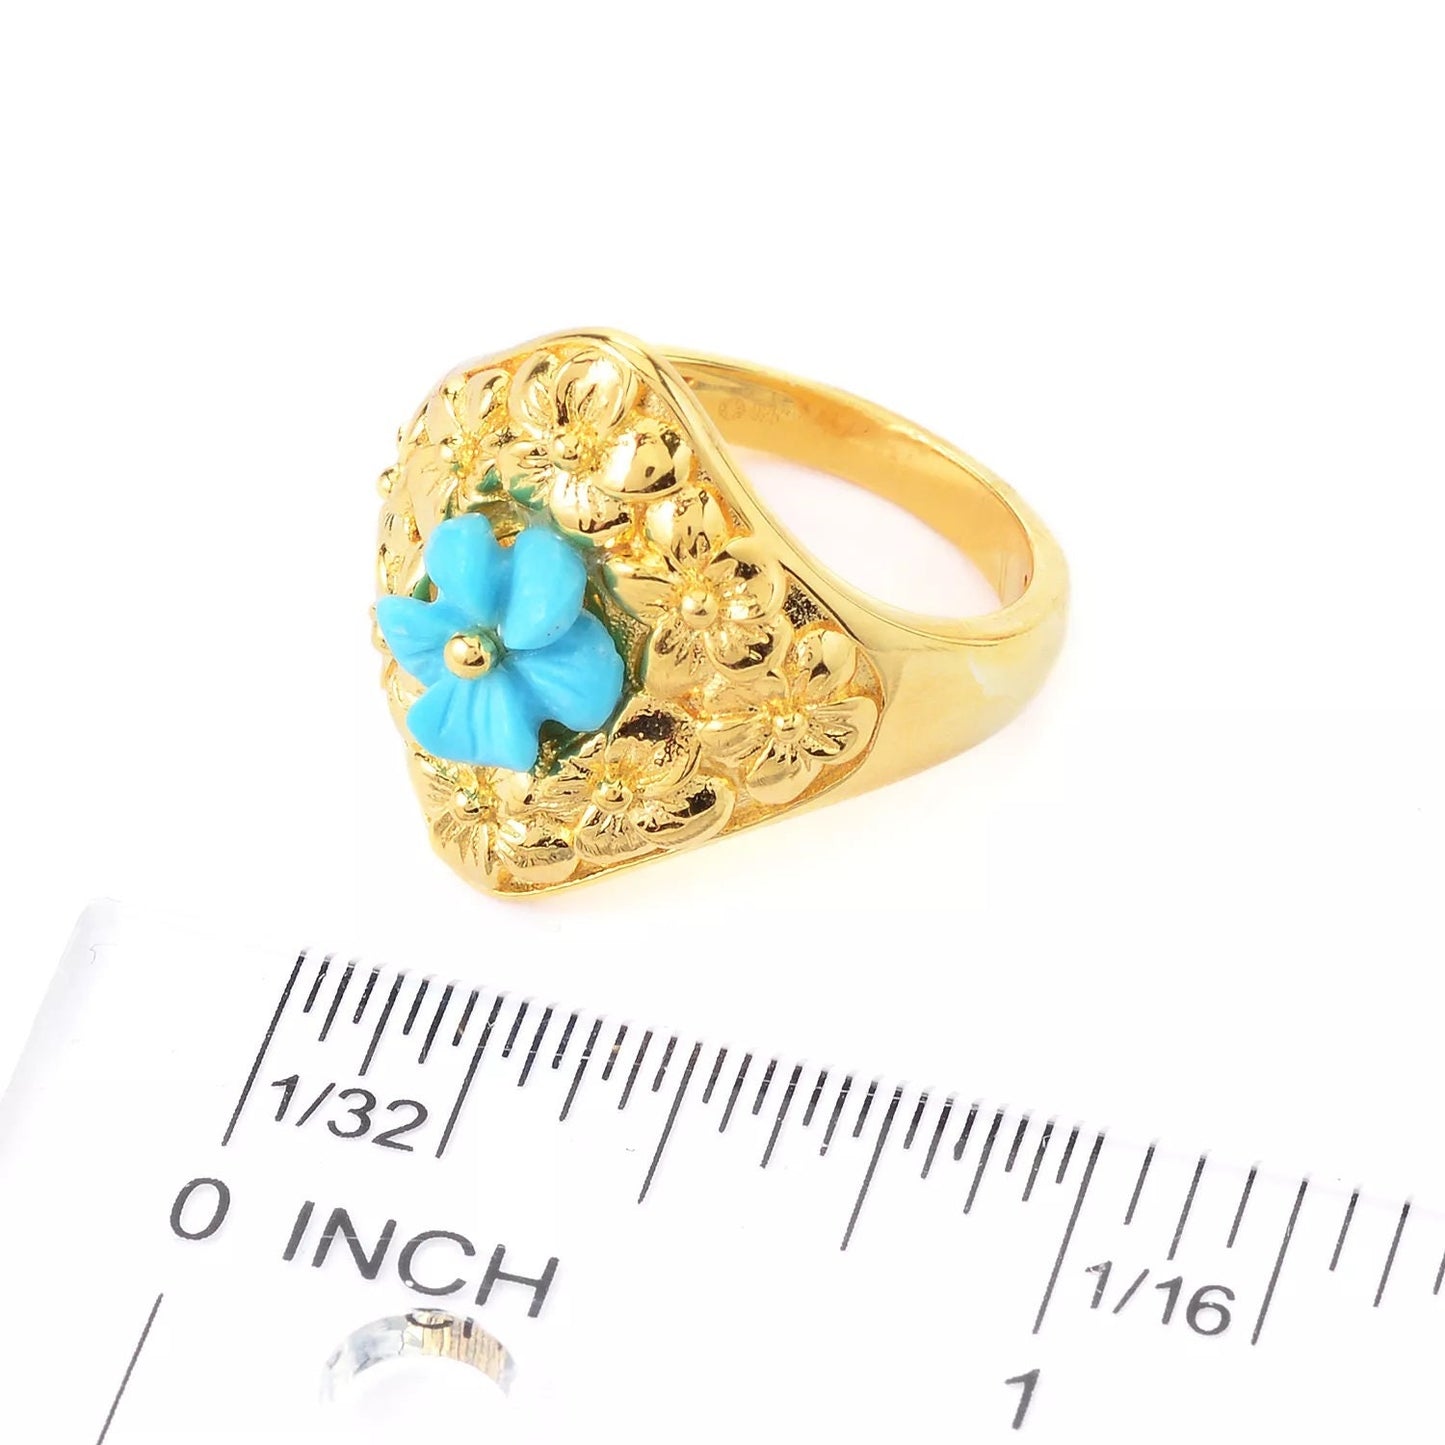 Natural Sleeping Beauty Turquoise Gemstone Silver Ring 925 Sterling Silver Gold Plated Ring Flower Ring Wedding Anniversary Gift